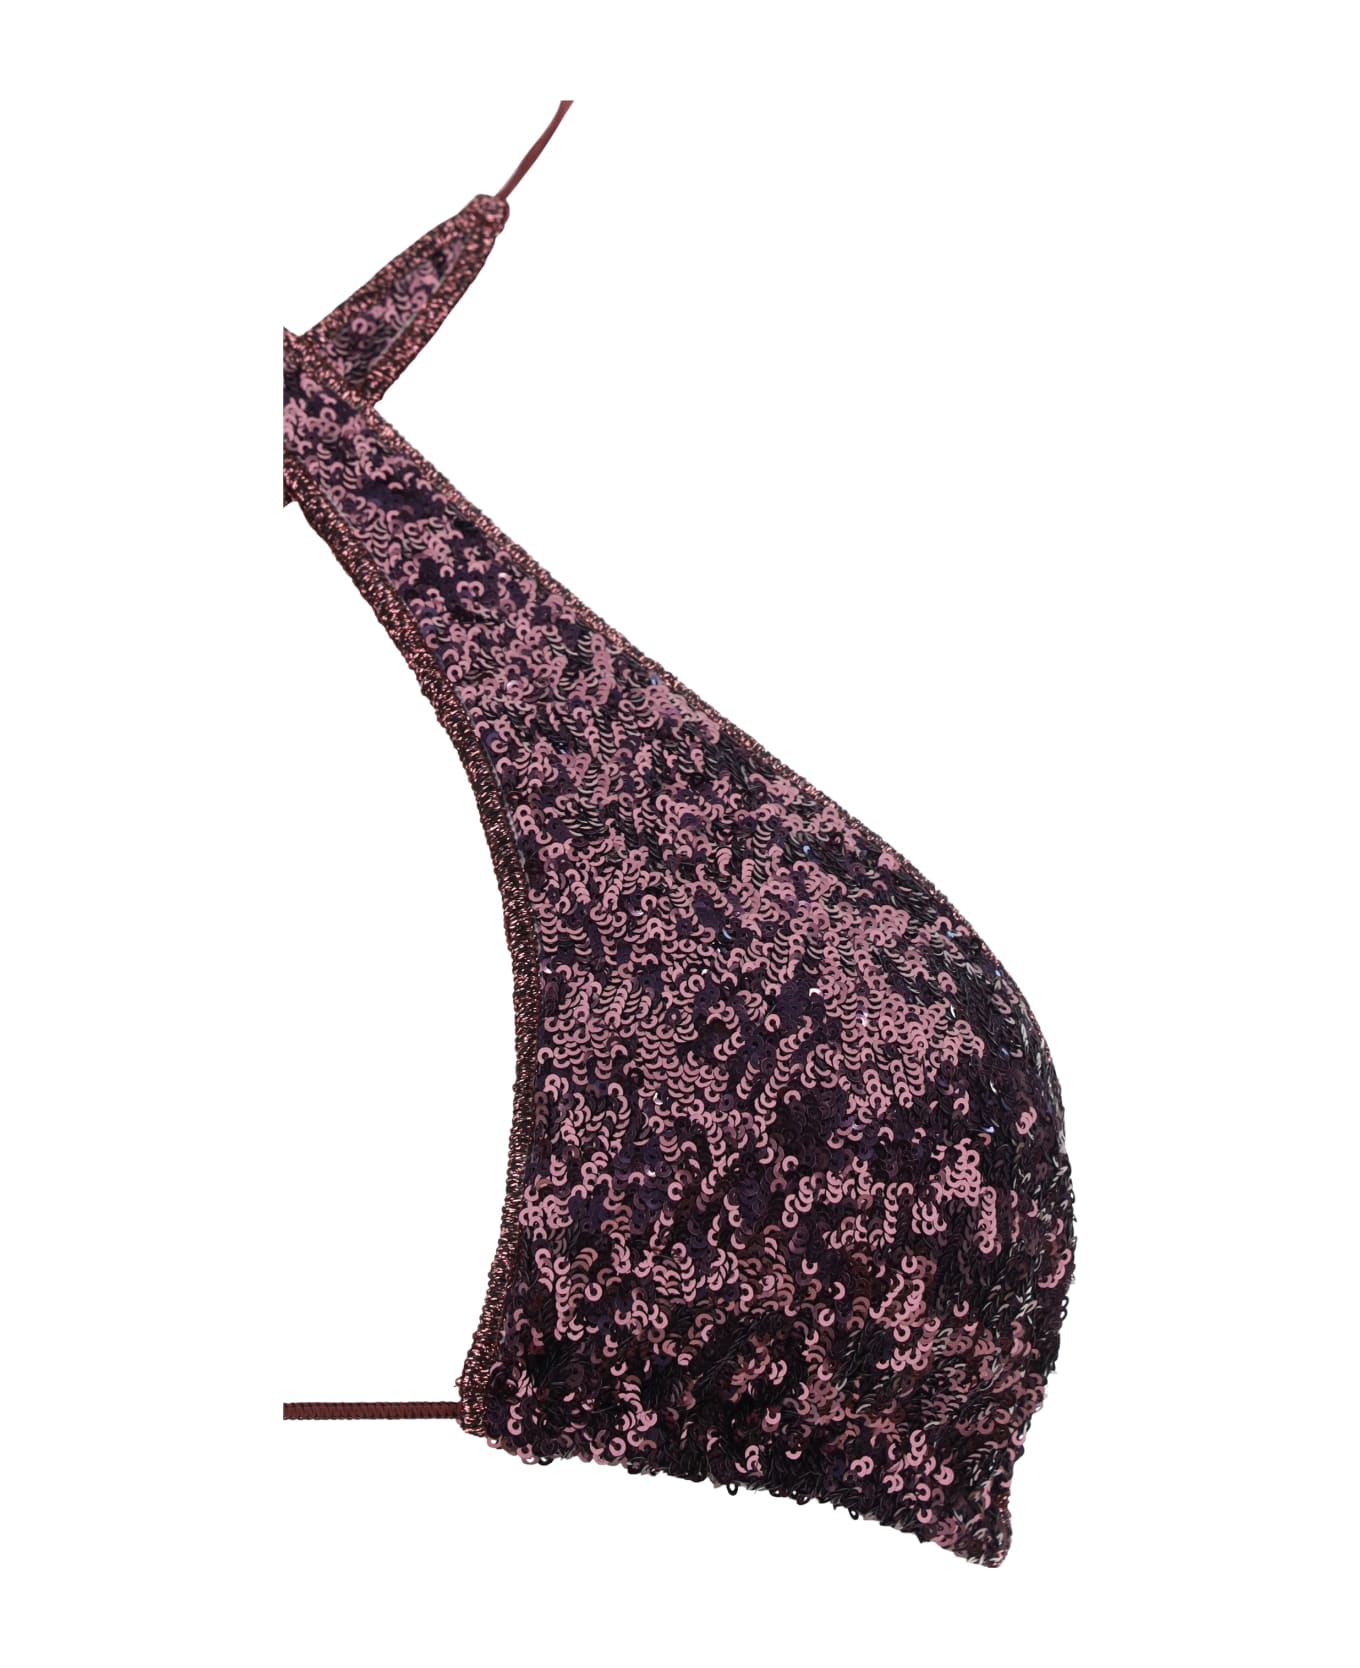 Oseree Paillettes Crossed Swimsuit - Plum